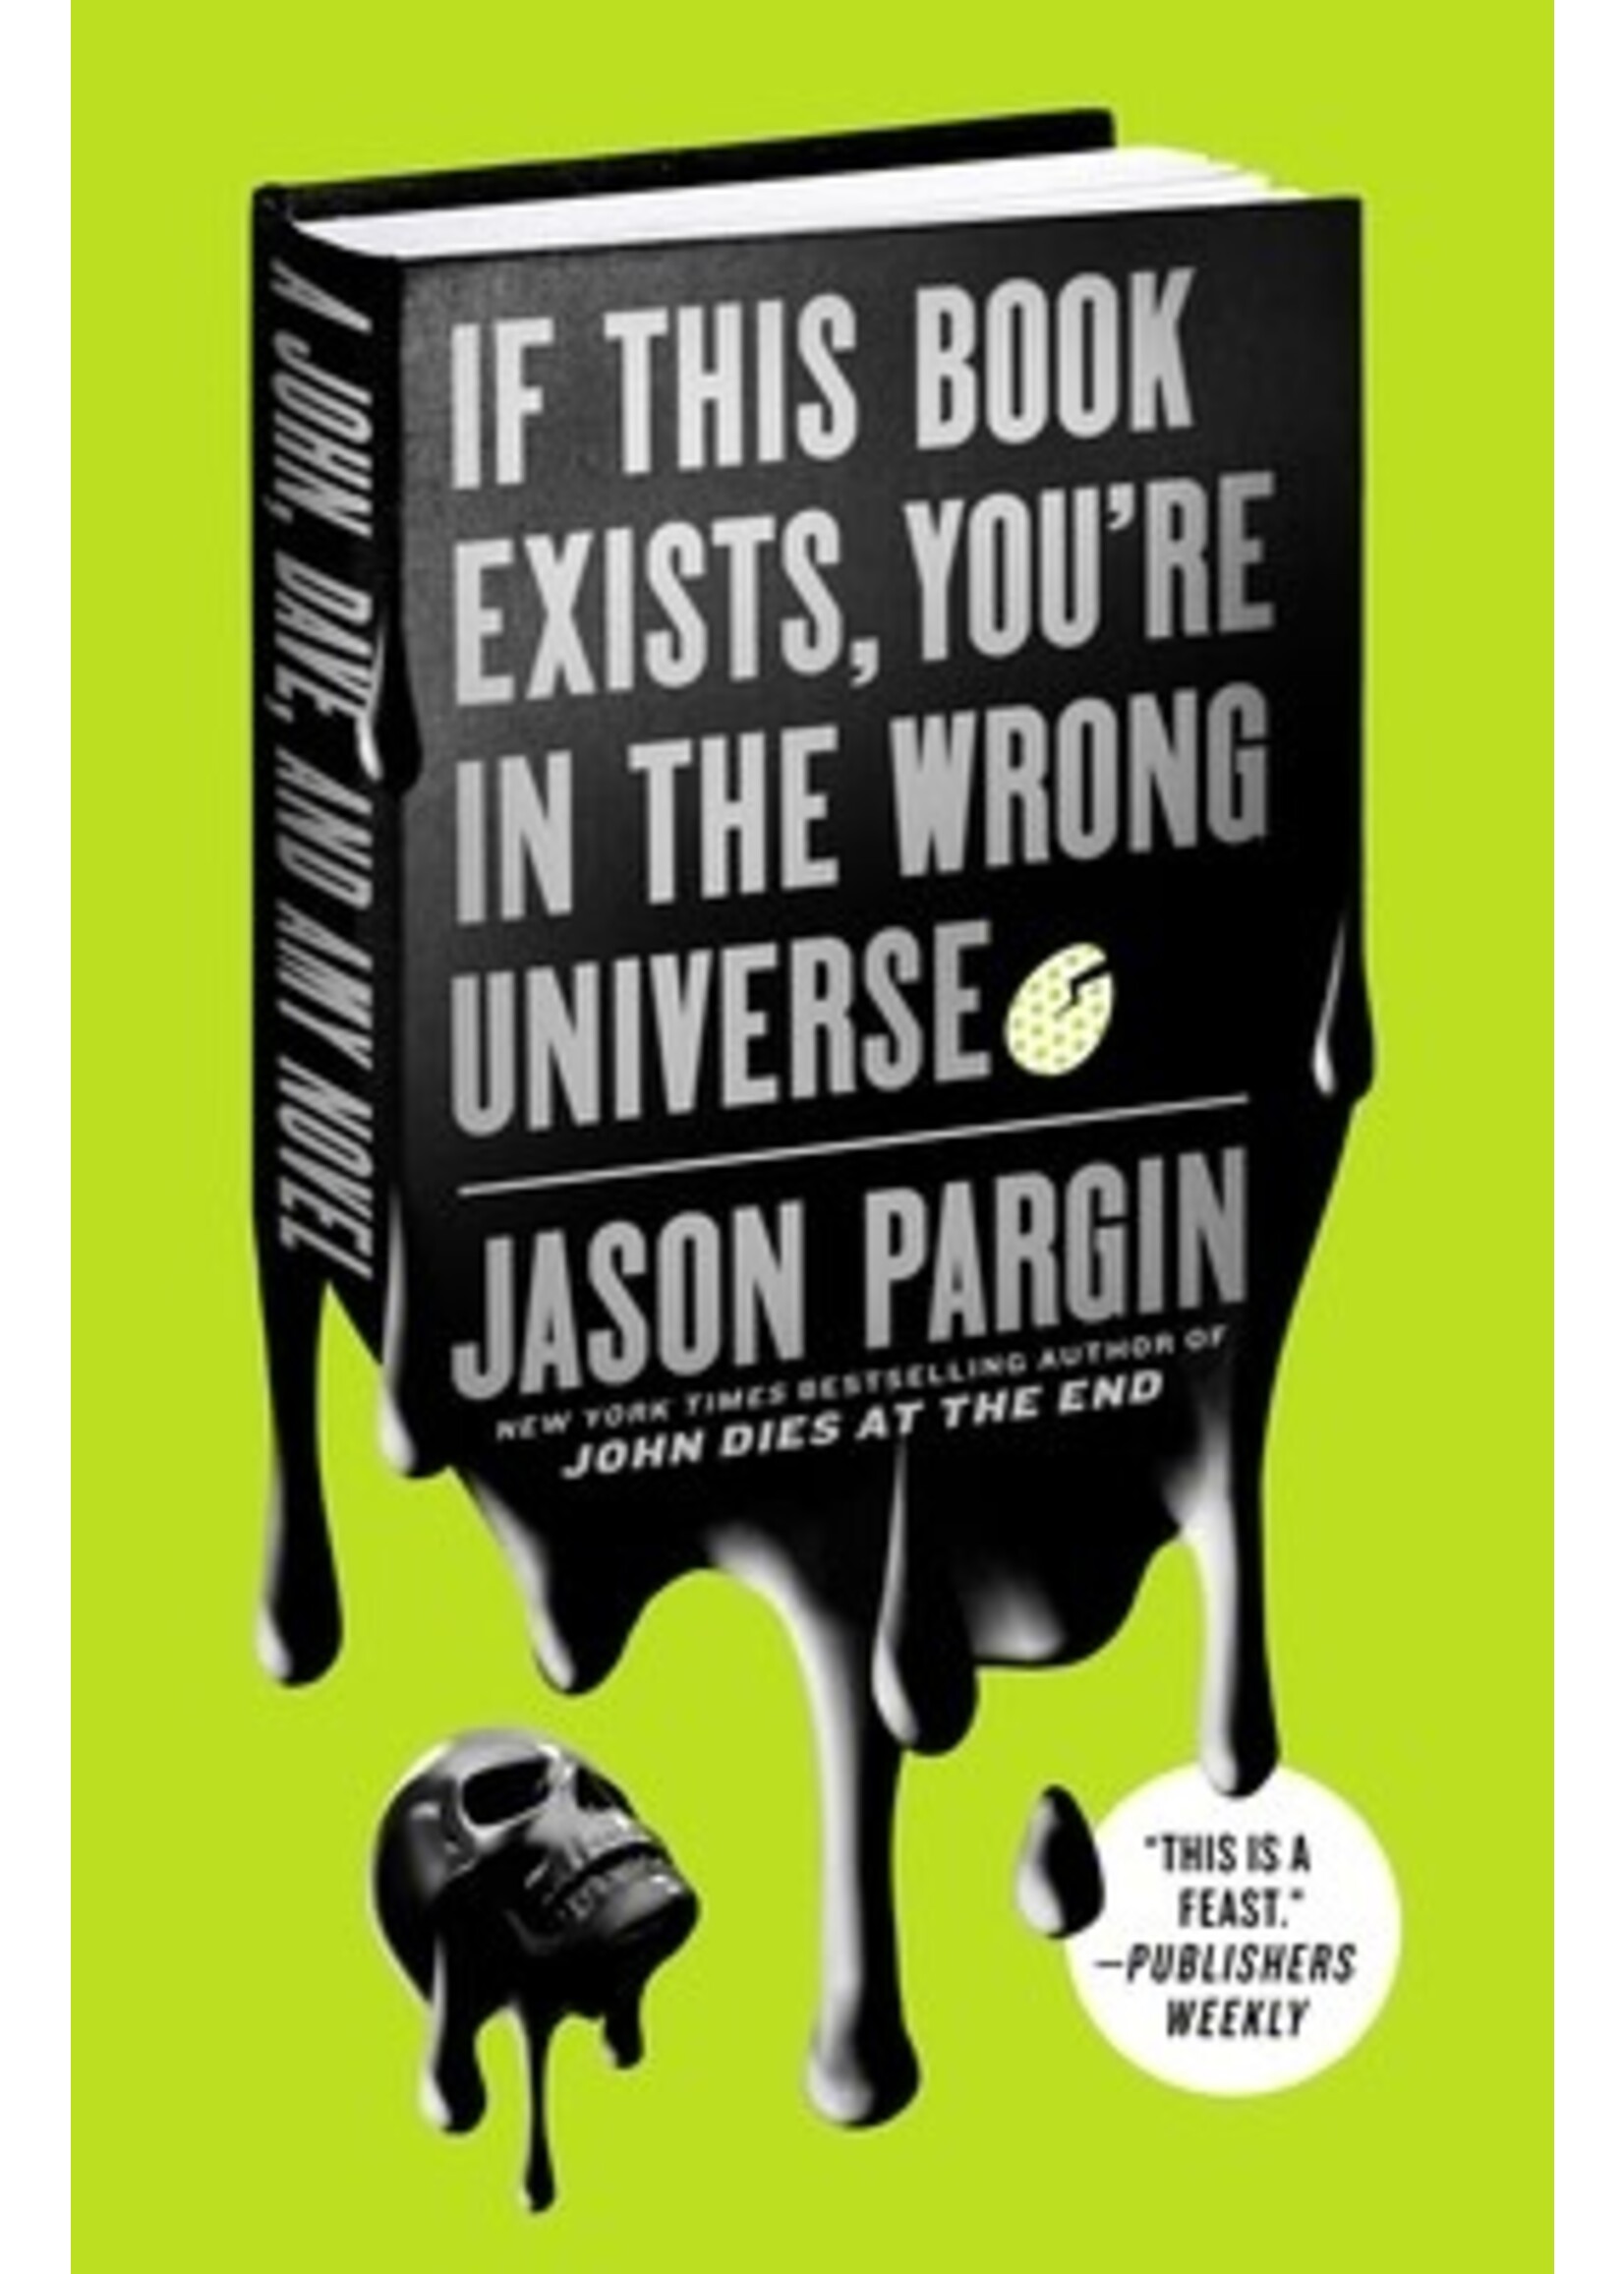 If This Book Exists, You're in the Wrong Universe (John Dies at the End #4 ) by Jason Pargin